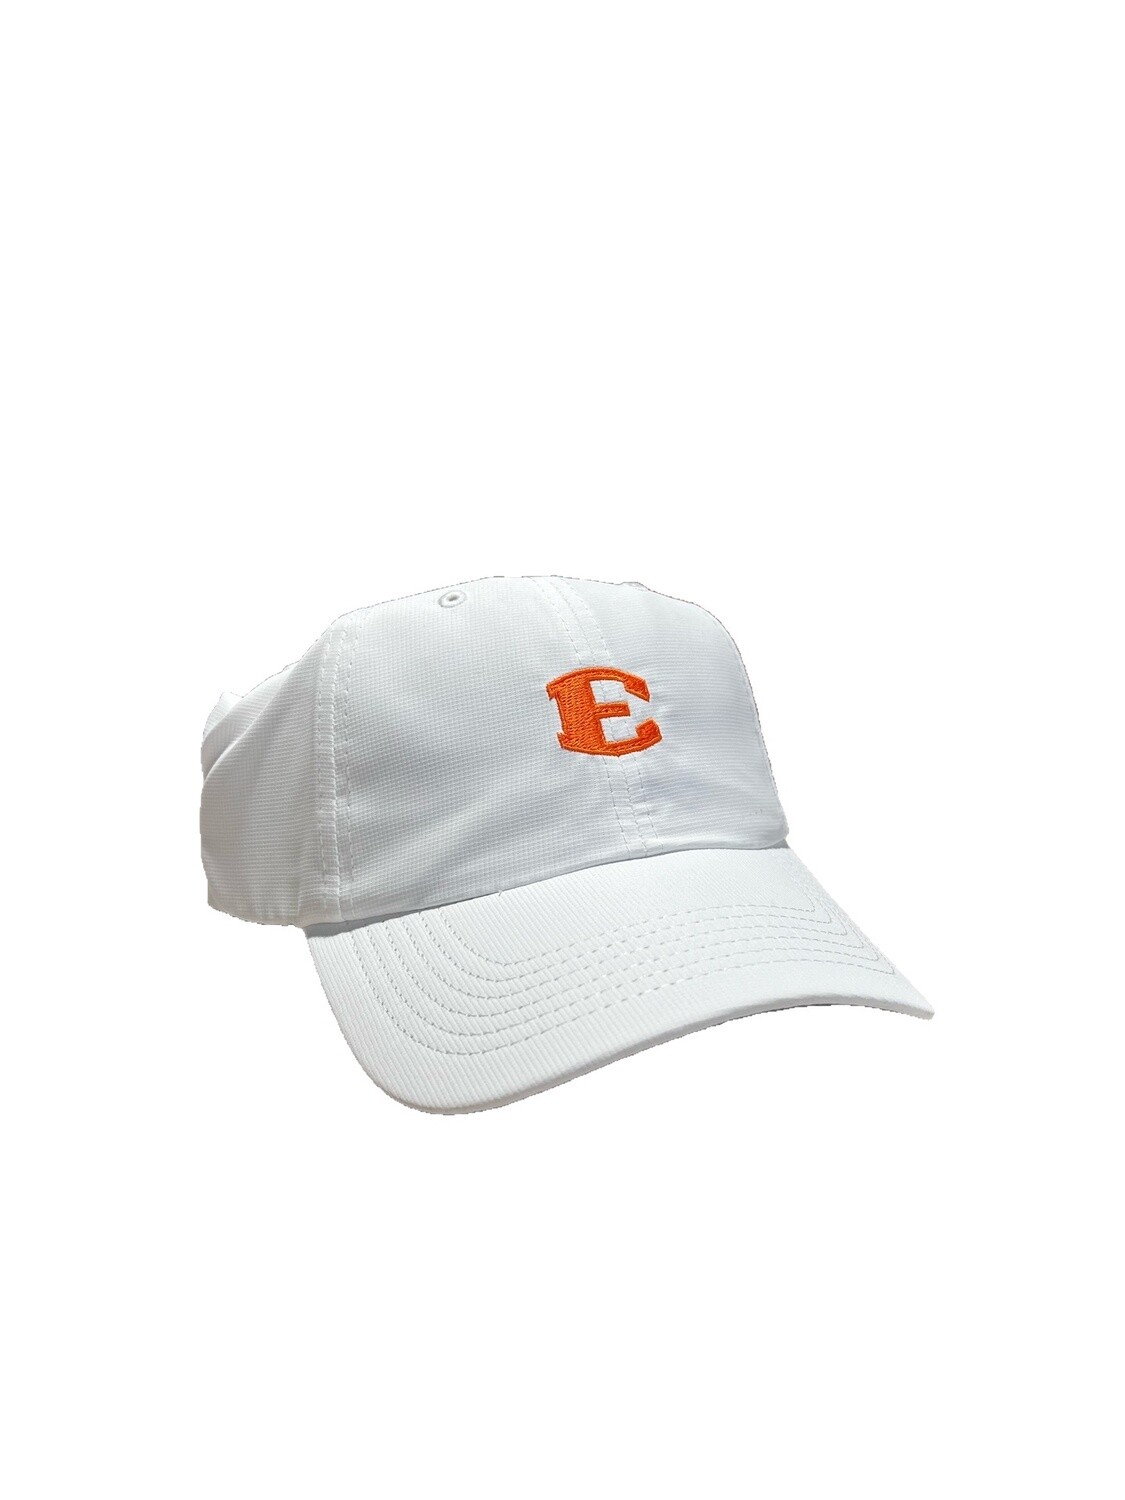 Imperial Adult Performance Cap/Solid E, Color: White